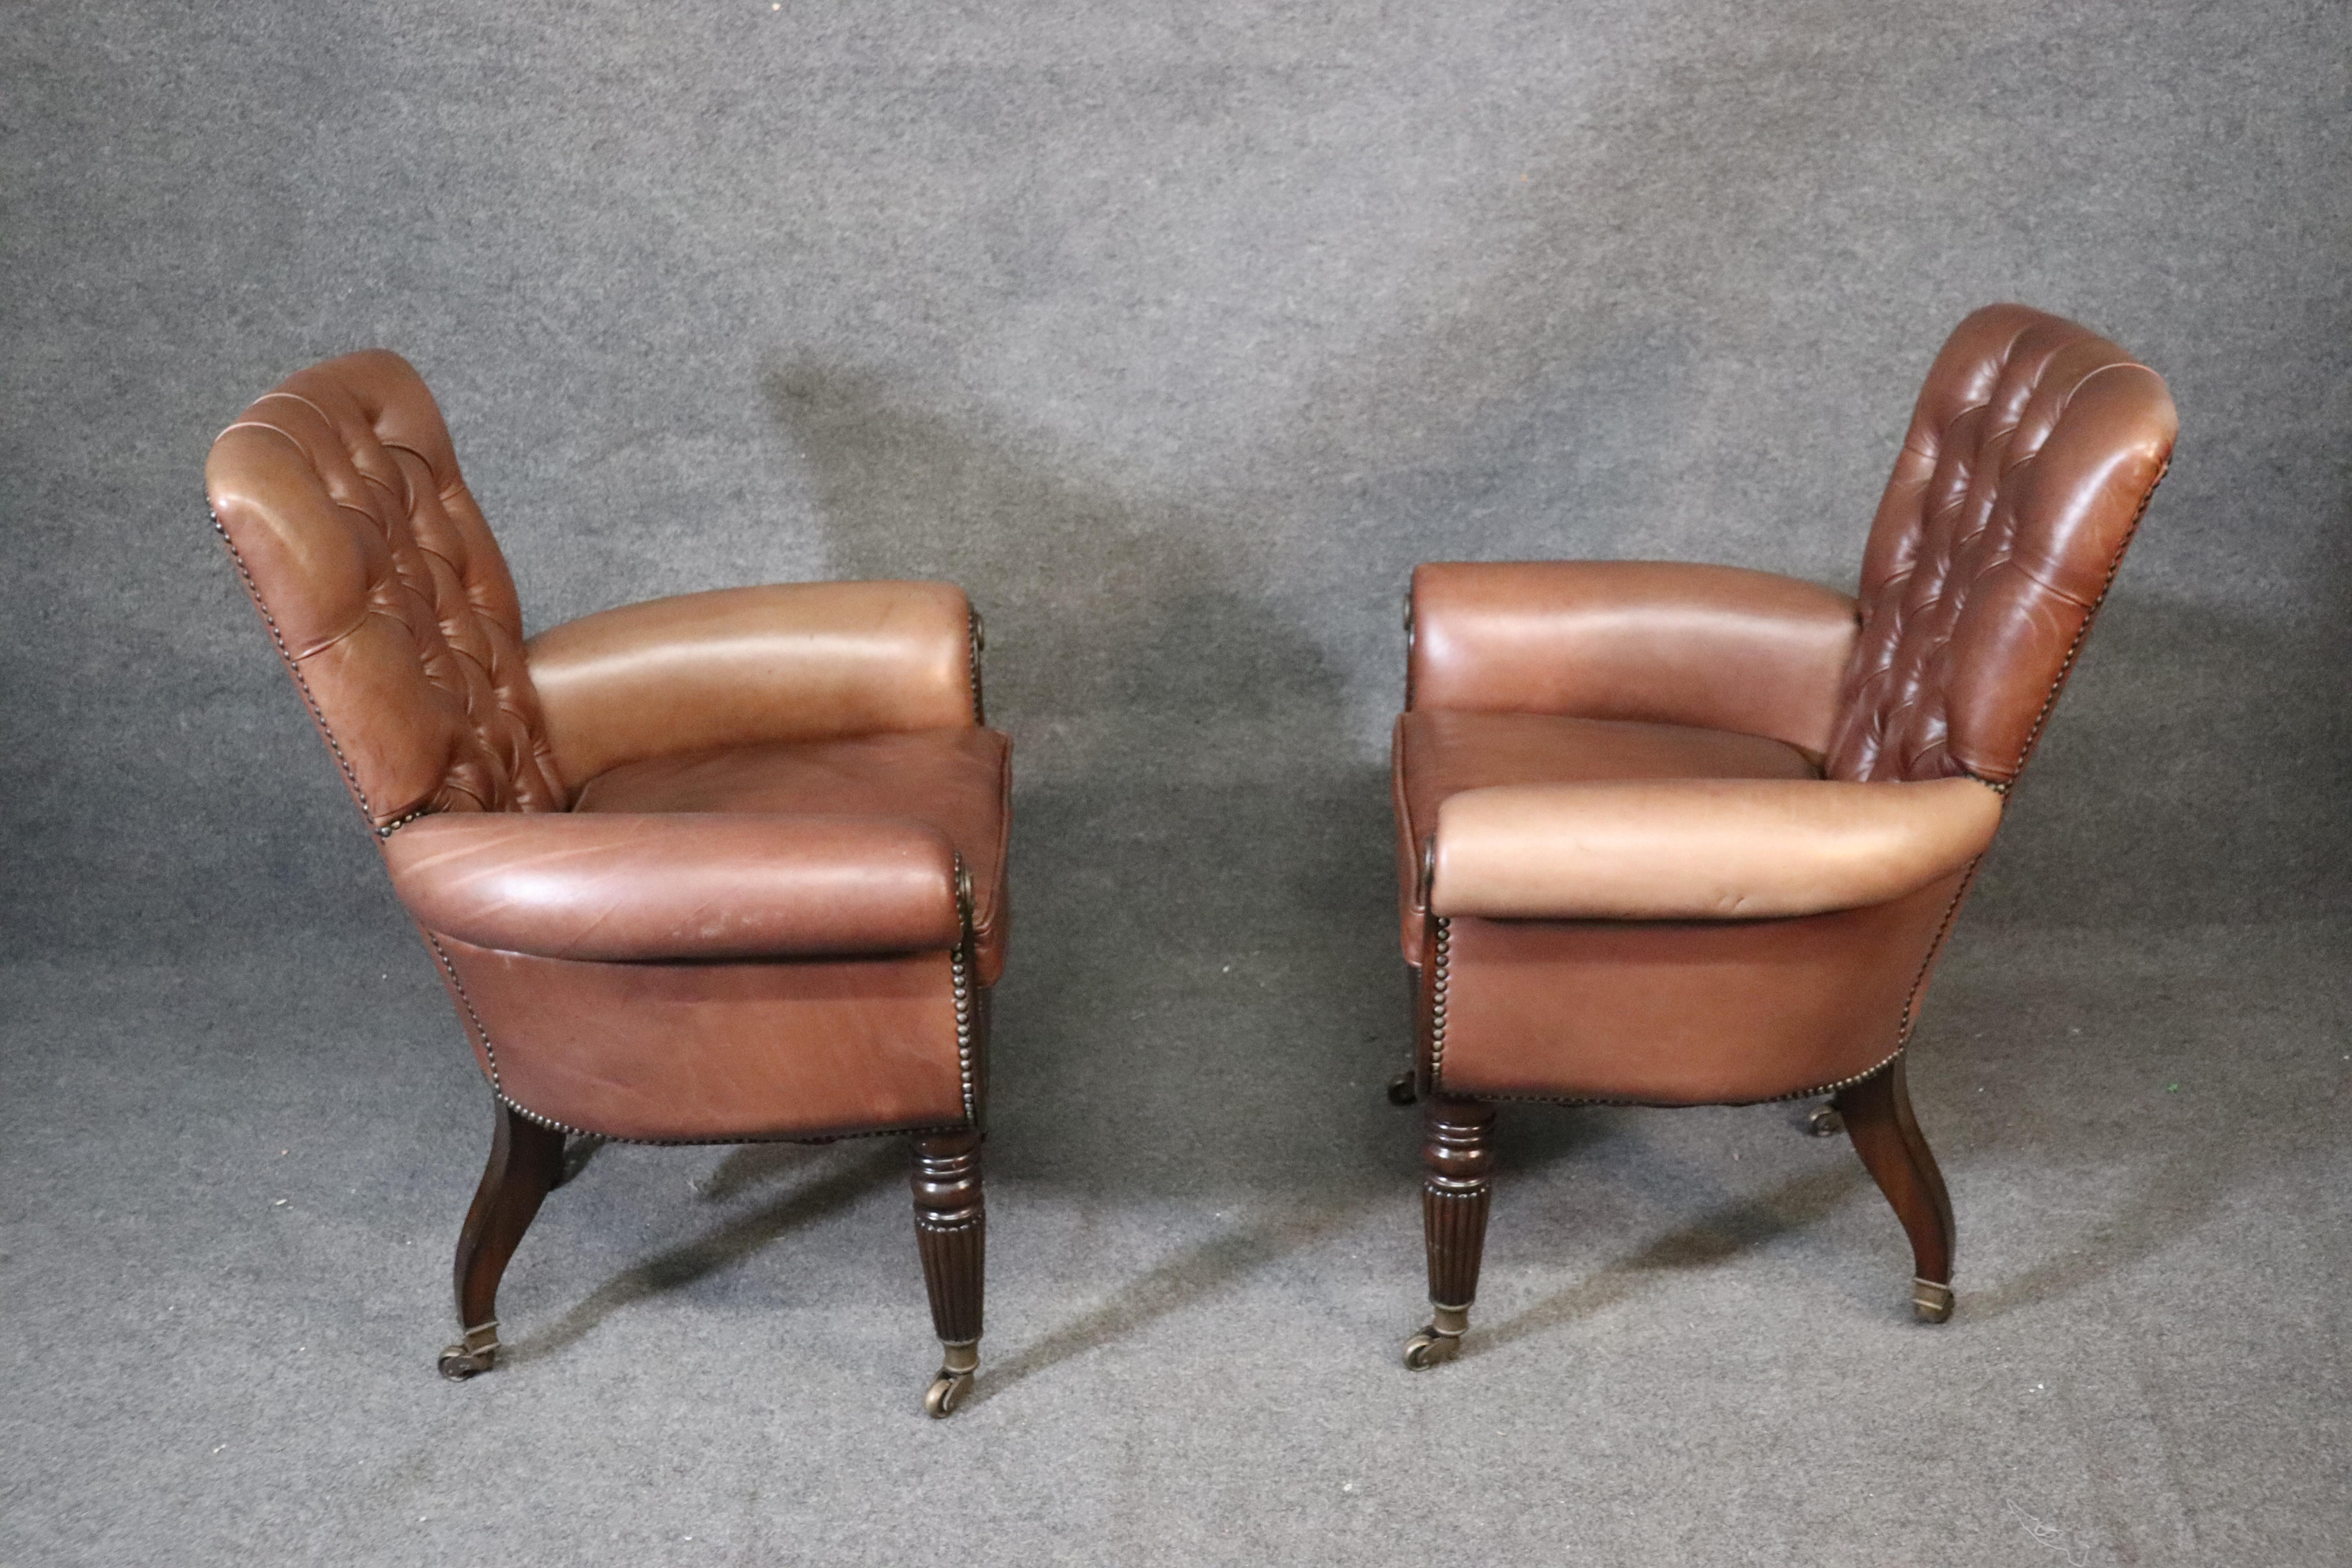 This is a pair of gorgeous mocha brown genuine top-grain leather chairs in the Georgian style with terrific hand carved mahogany frames, circa 2000. They are in very good condition with minimal wear as they are less than 20 years old. They measure